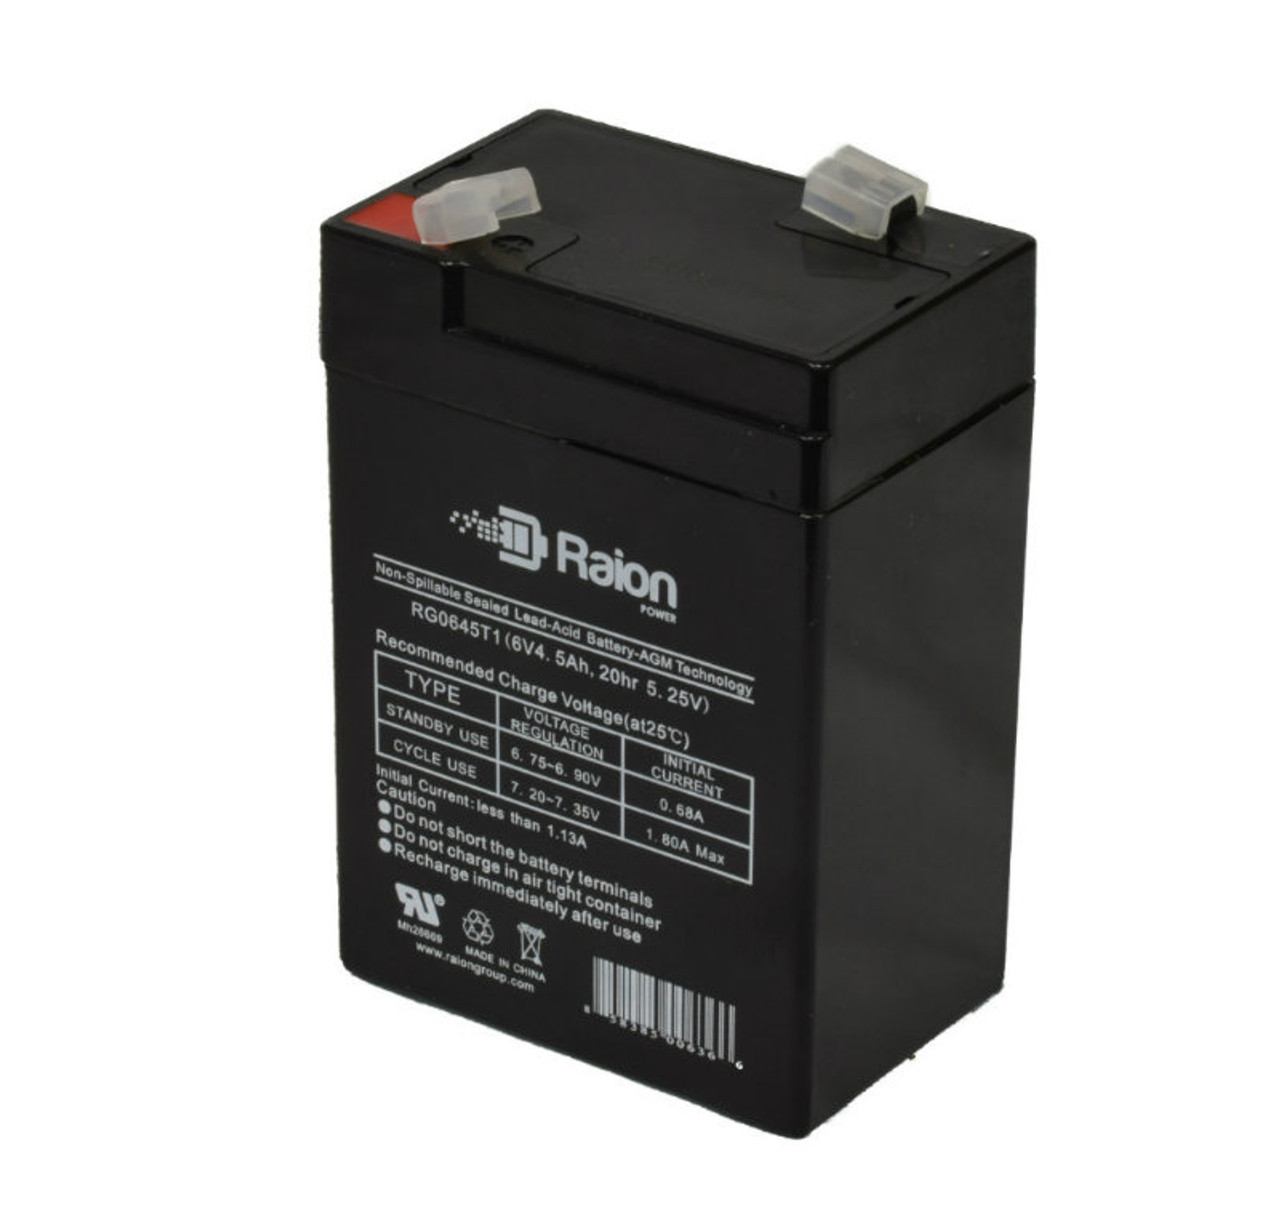 Raion Power RG0645T1 6V 4.5Ah Replacement Battery Cartridge for Lithonia EMB0PS6401